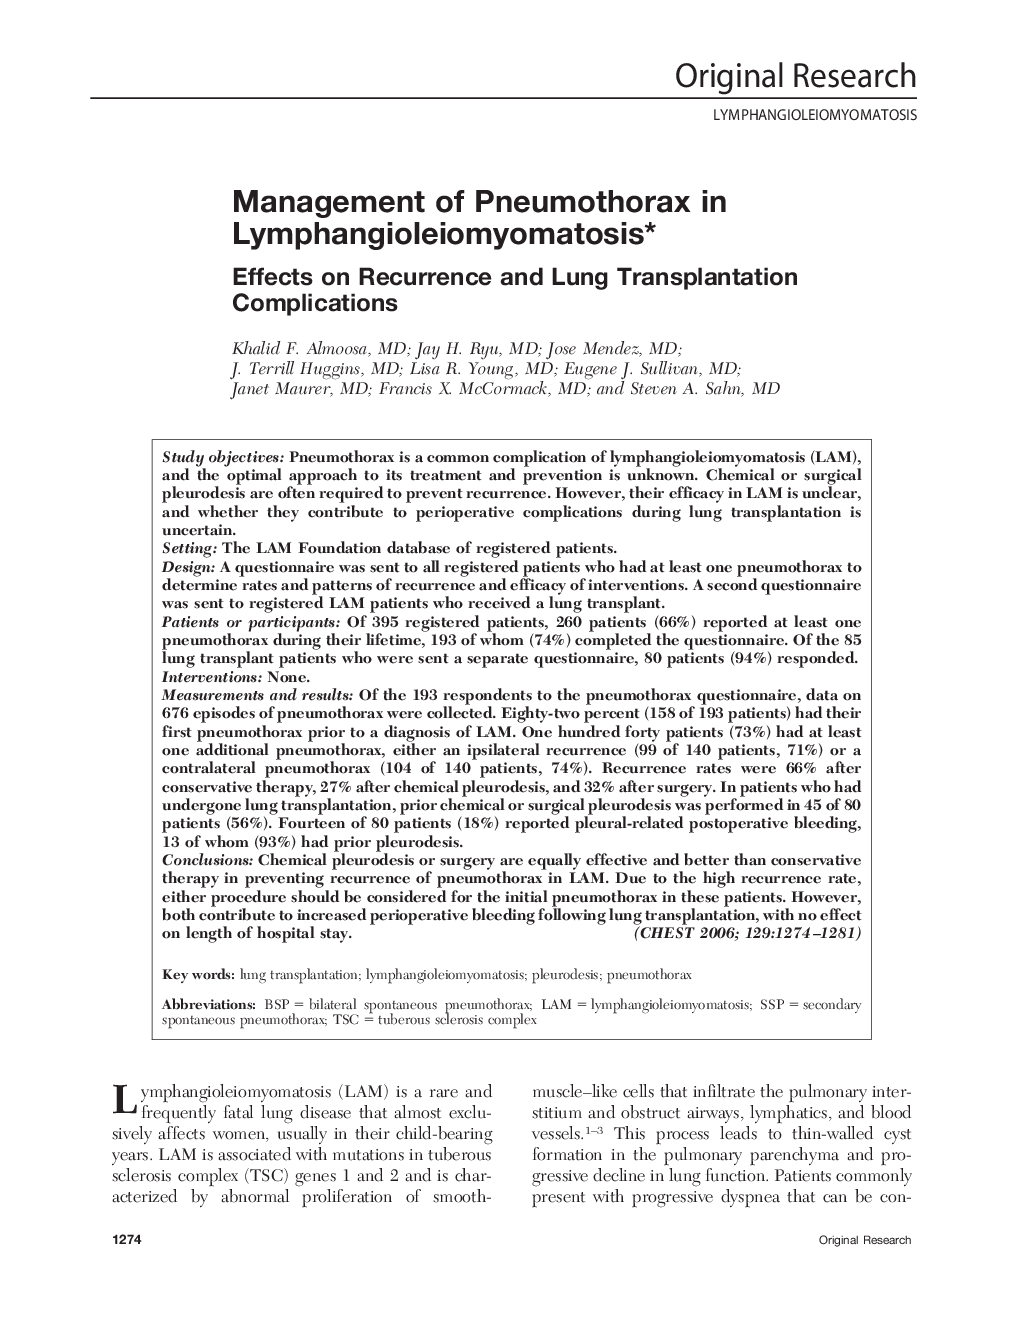 Management of Pneumothorax in Lymphangioleiomyomatosis : Effects on Recurrence and Lung Transplantation Complications